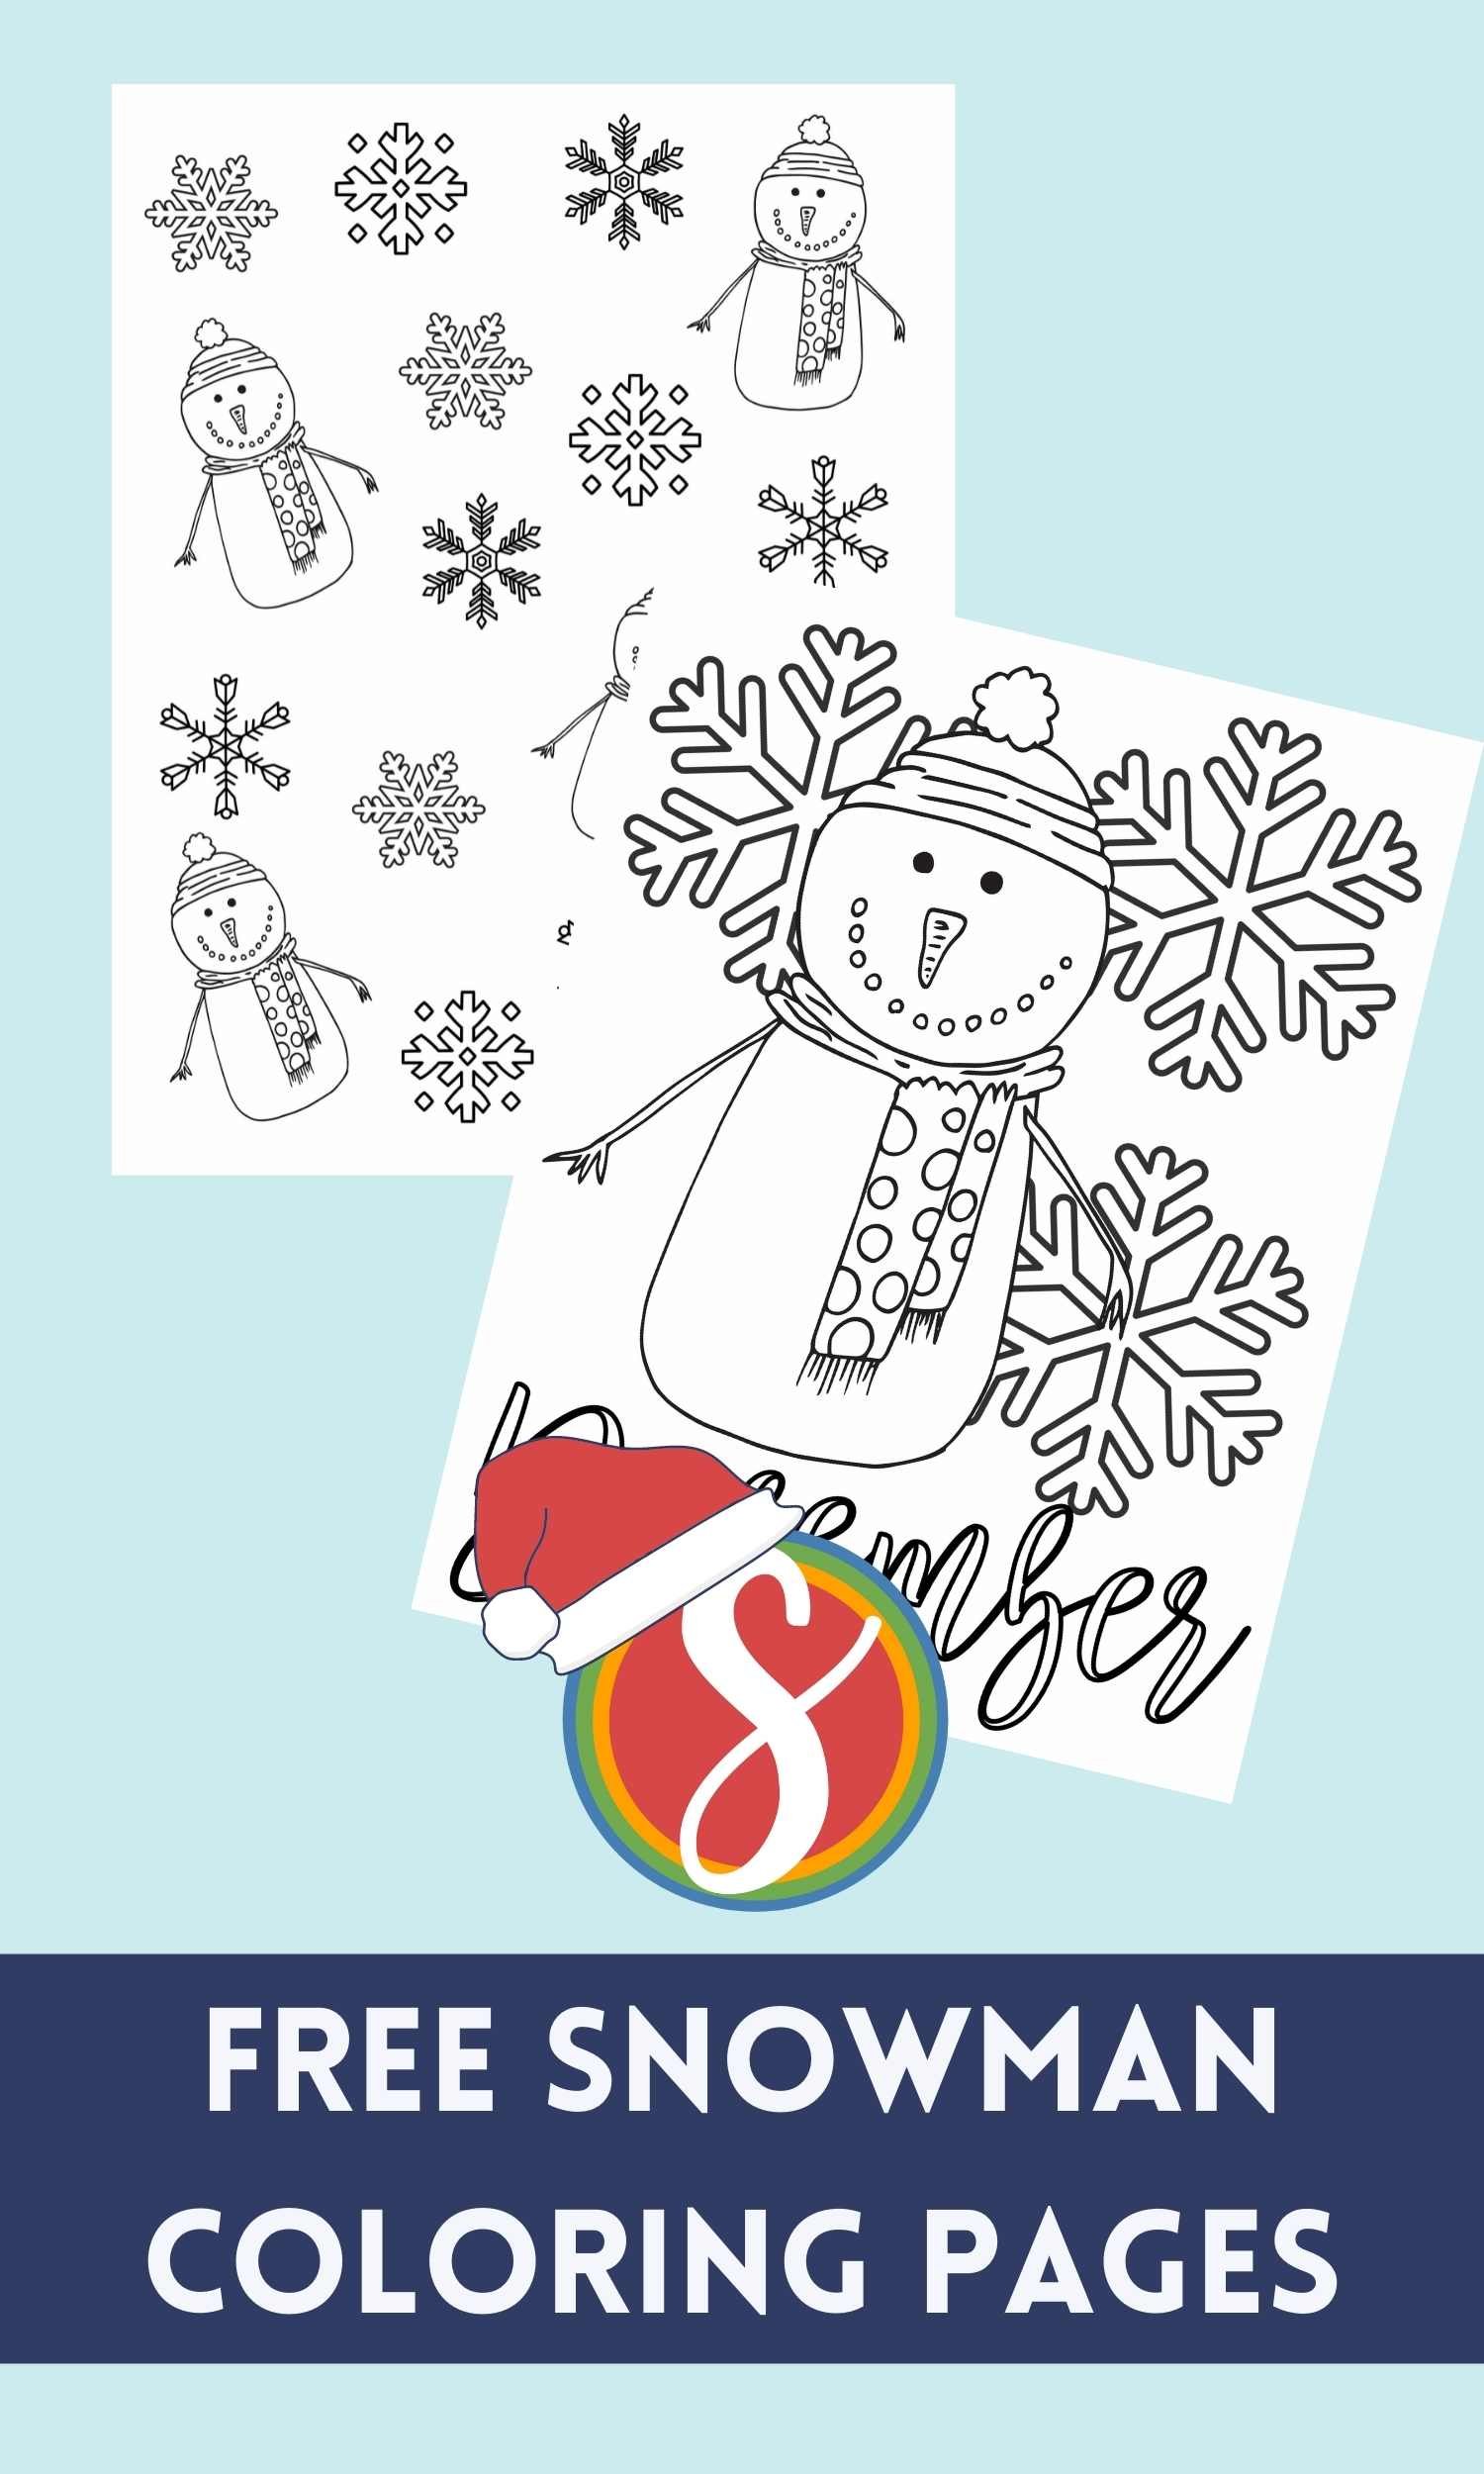 2 snowmen coloring pages on a light blue background